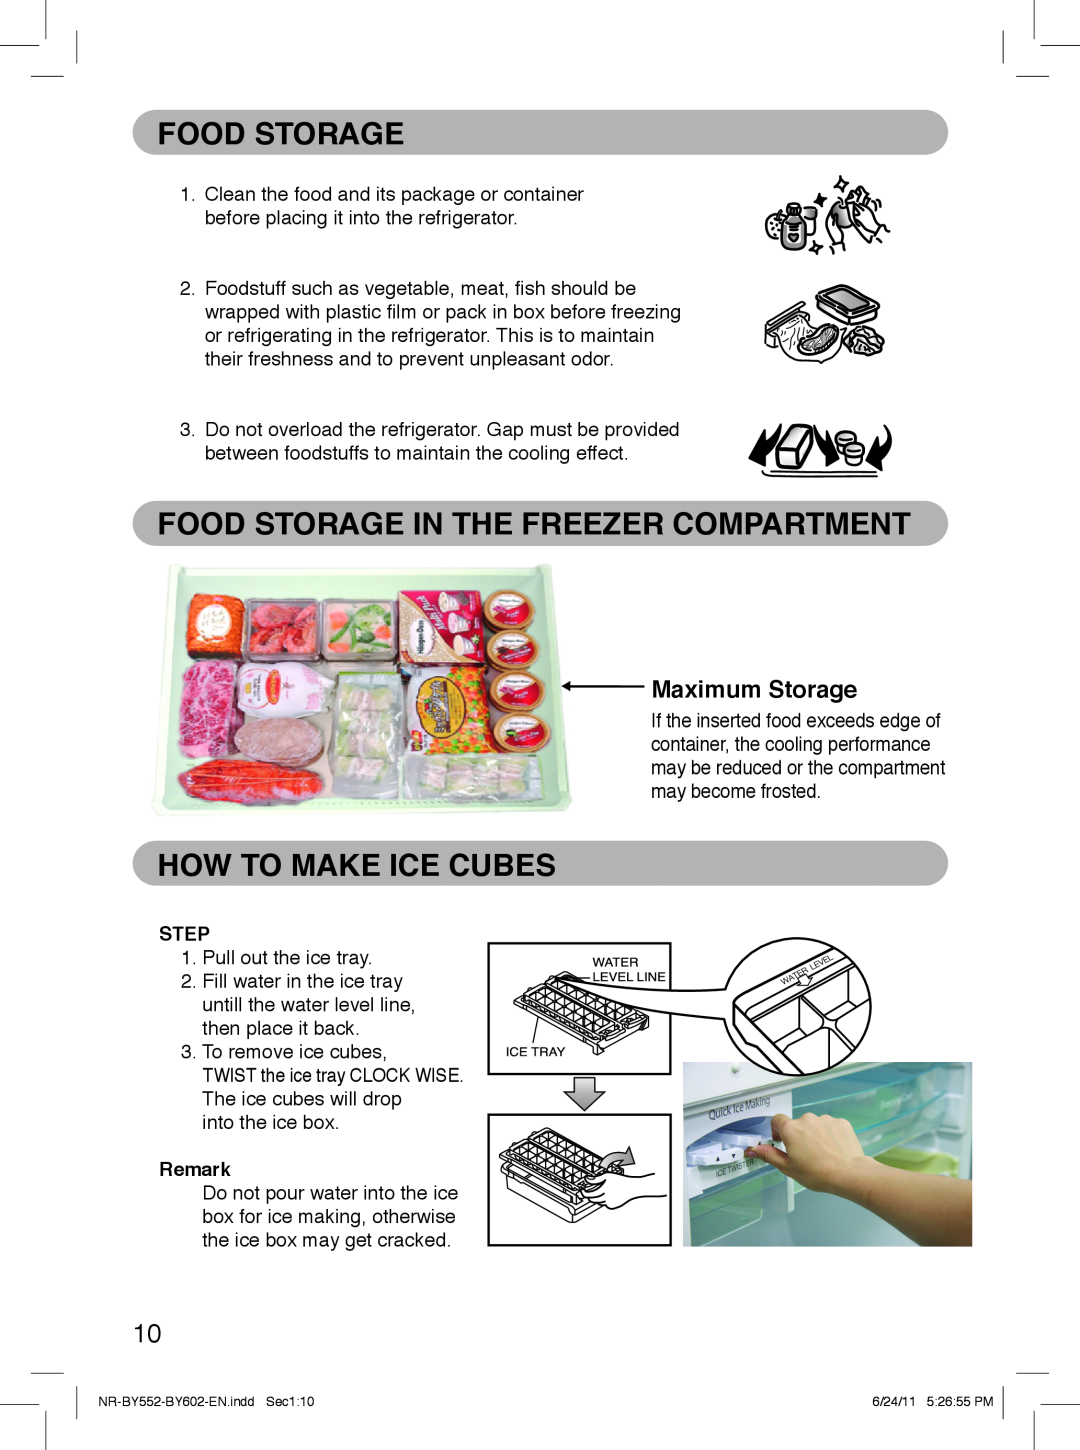 Panasonic NR-BY552, NR-BY602 Food Storage In The Freezer Compartment, How To Make Ice Cubes, Maximum Storage 